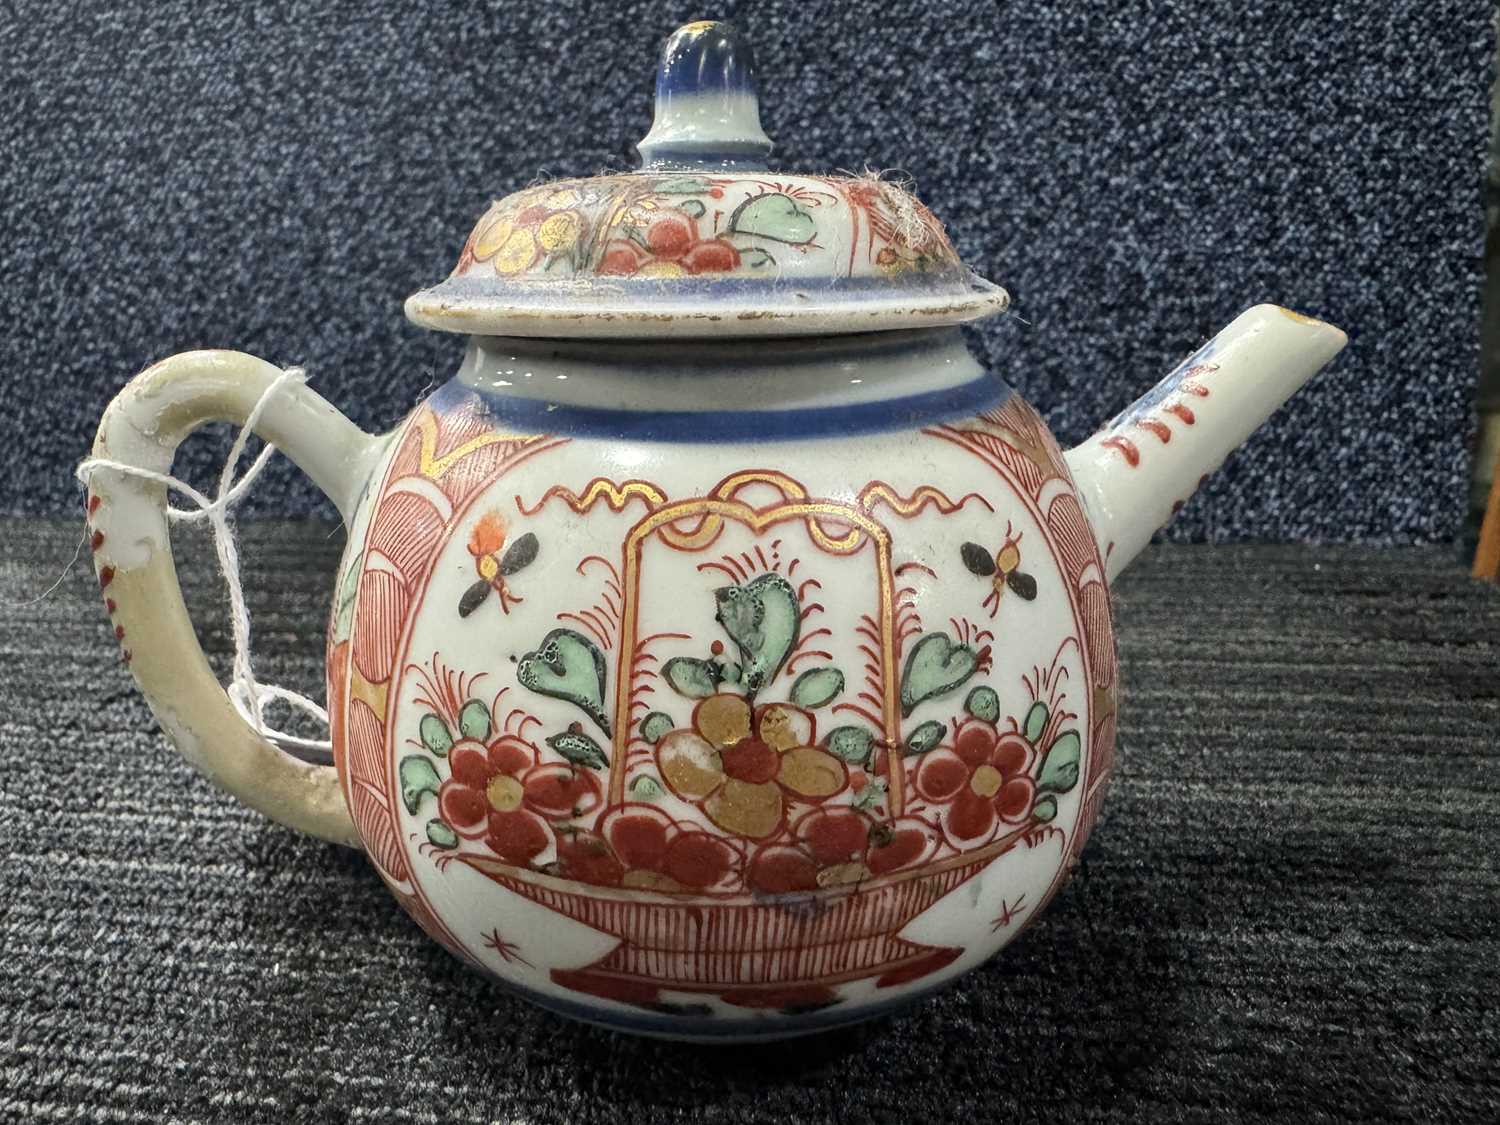 TWO 18TH CENTURY CHINESE PORCELAIN TEA POTS, KANGXI AND QIANLONG PERIODS - Image 17 of 18